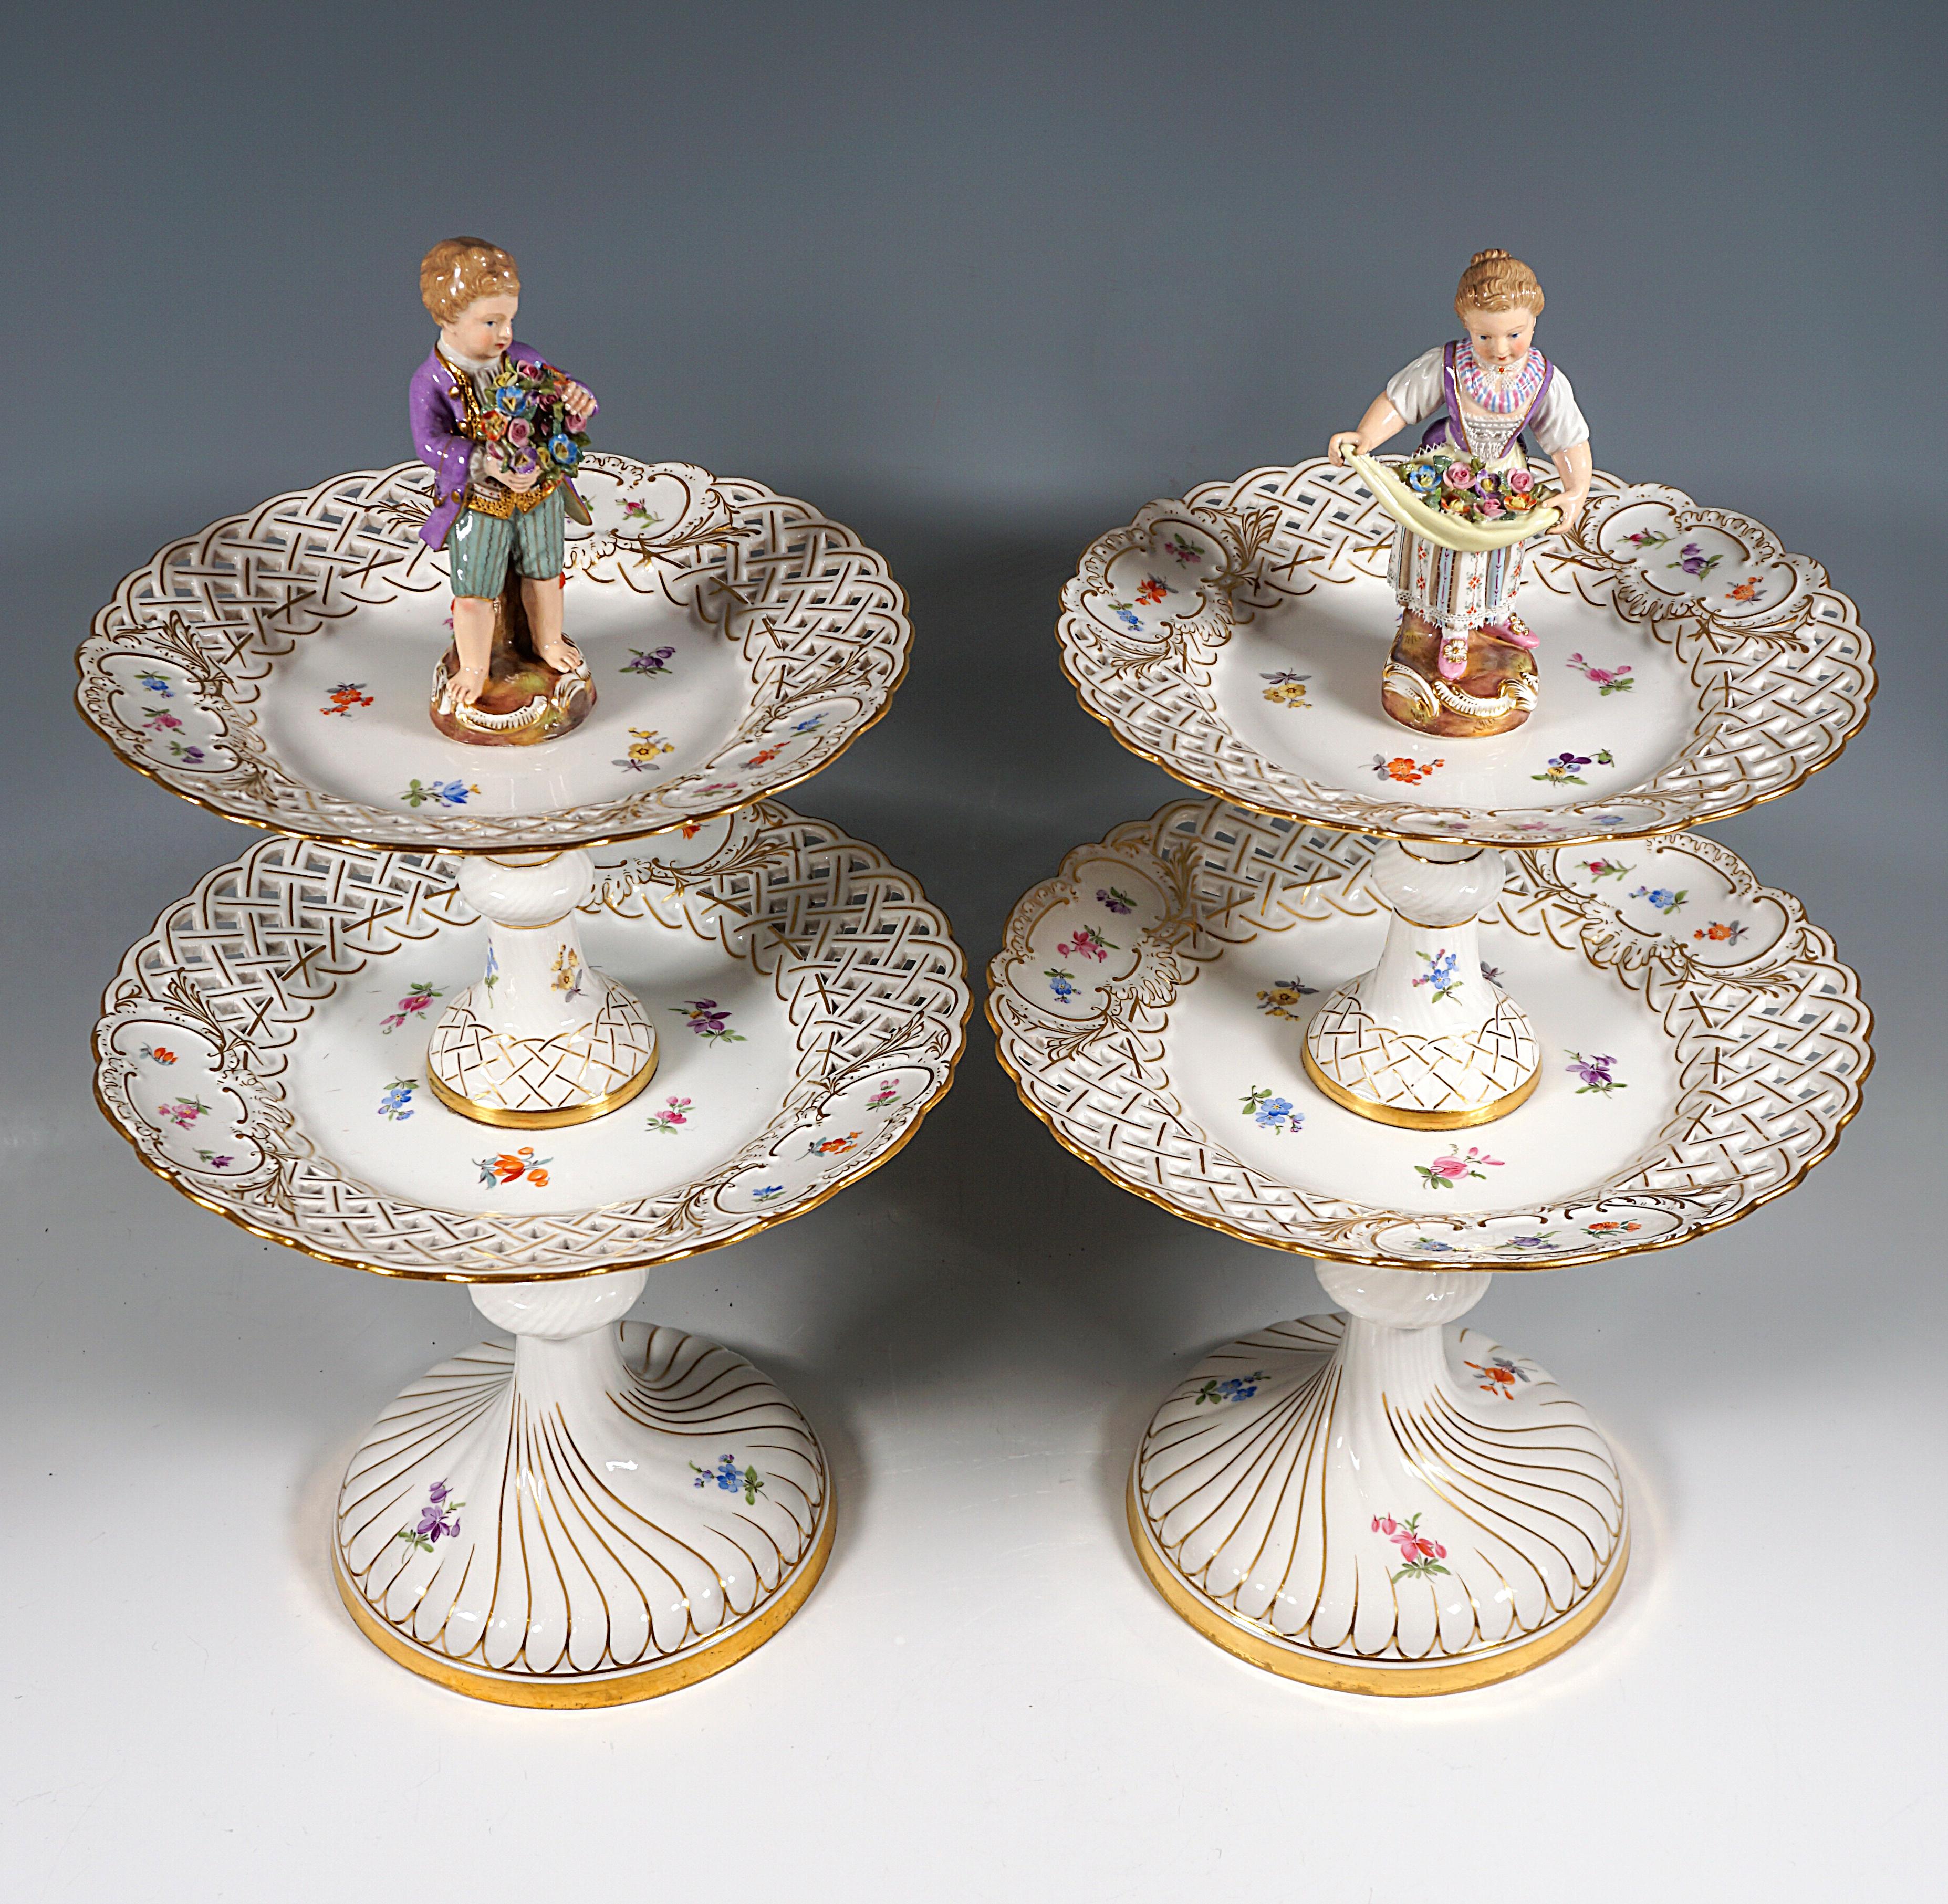 Pair of delicate porcelain centrepieces on a high, round base with curved boss decoration, the shaft divided by bead-like extensions, above two tiers in the form of two differently sized breakthrough plates with medallions, each crowned by a